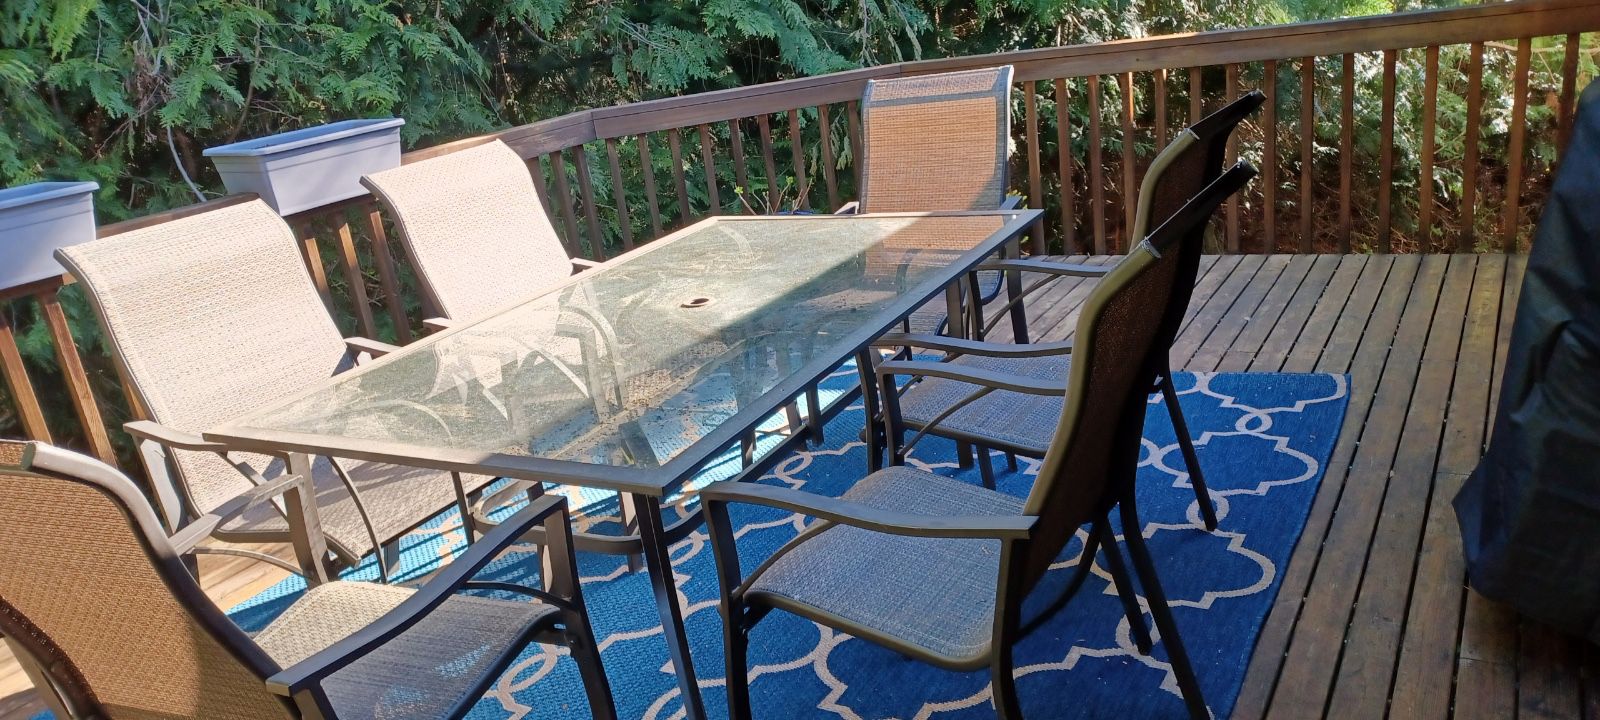 Outdoor Table Chairs.